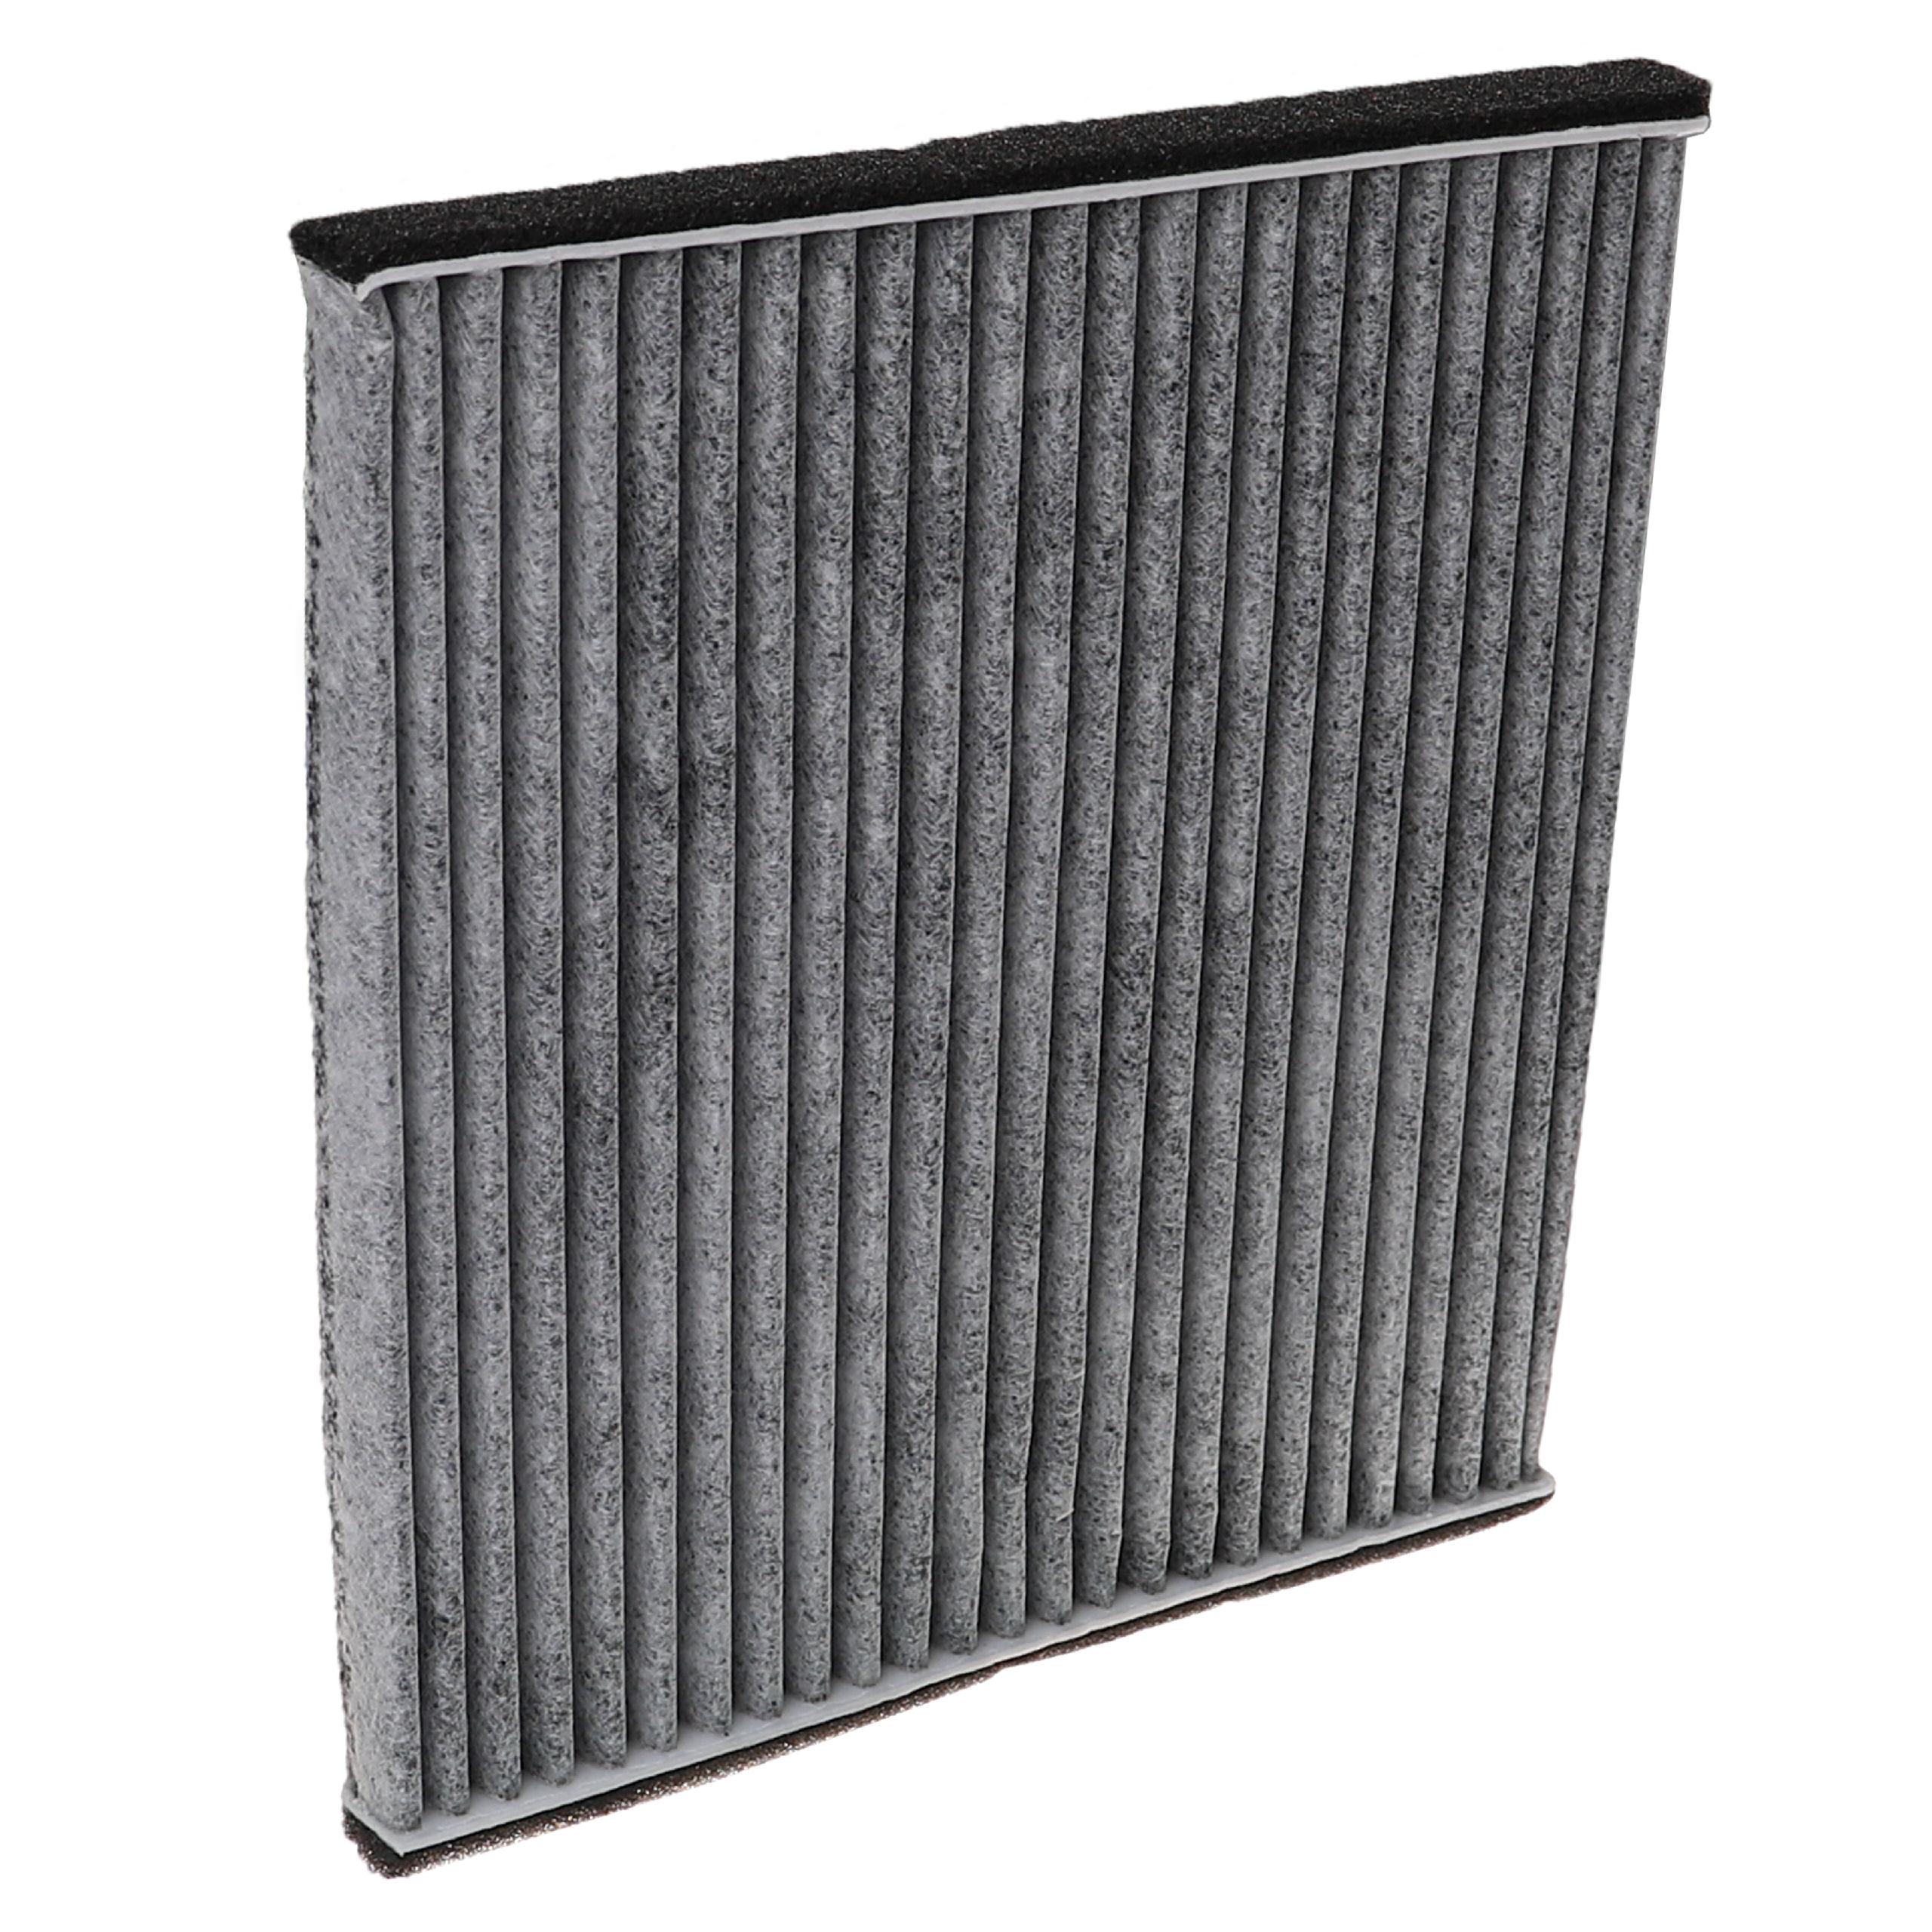 Cabin Air Filter replaces Alco Filter MS-6240 etc.